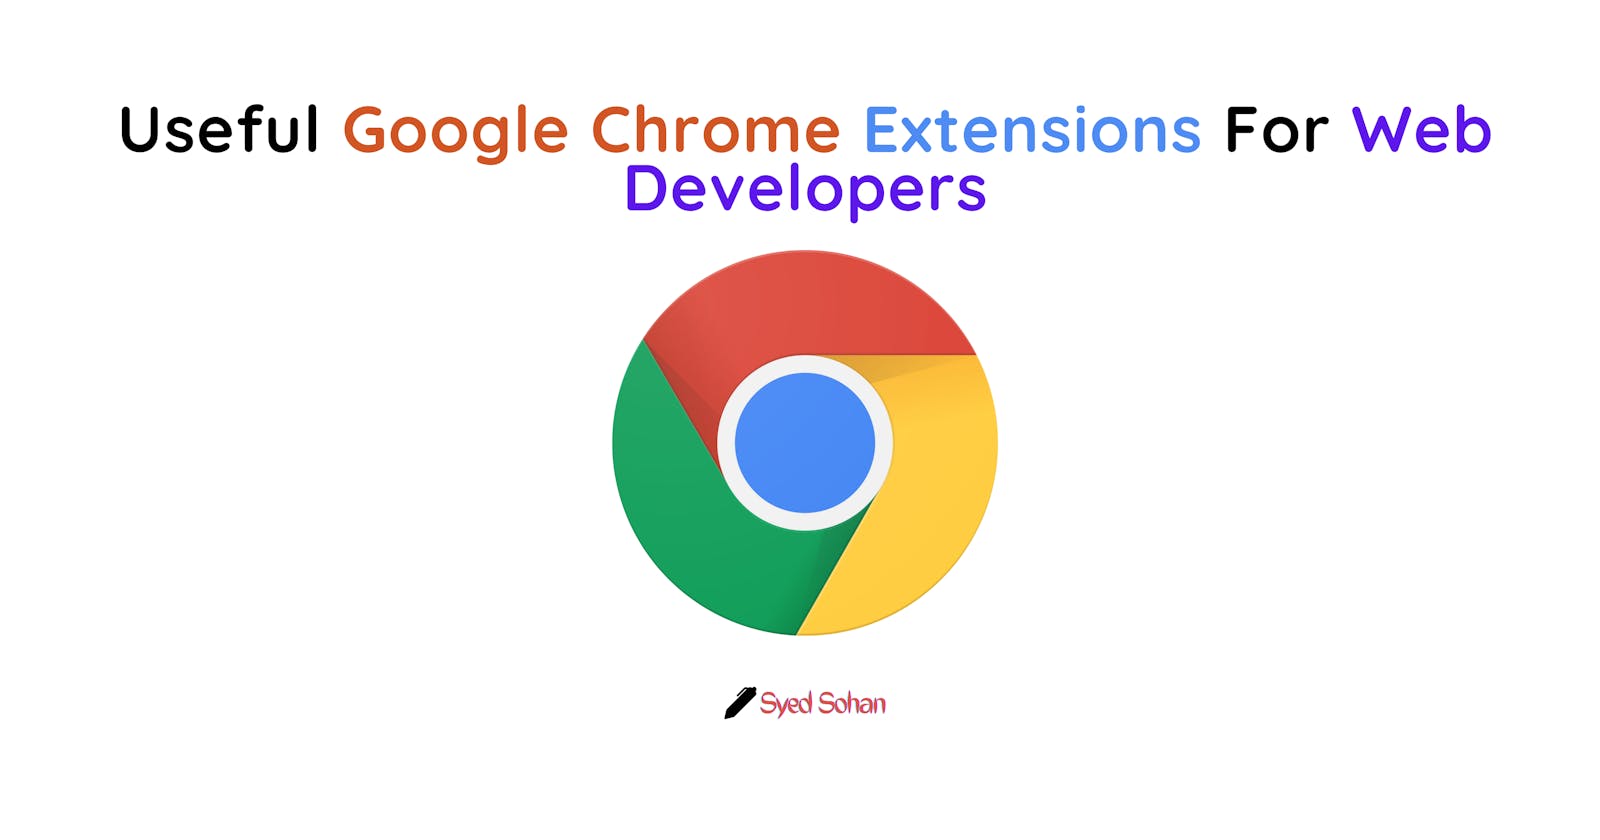 Useful Google Chrome Extensions for Web Developers